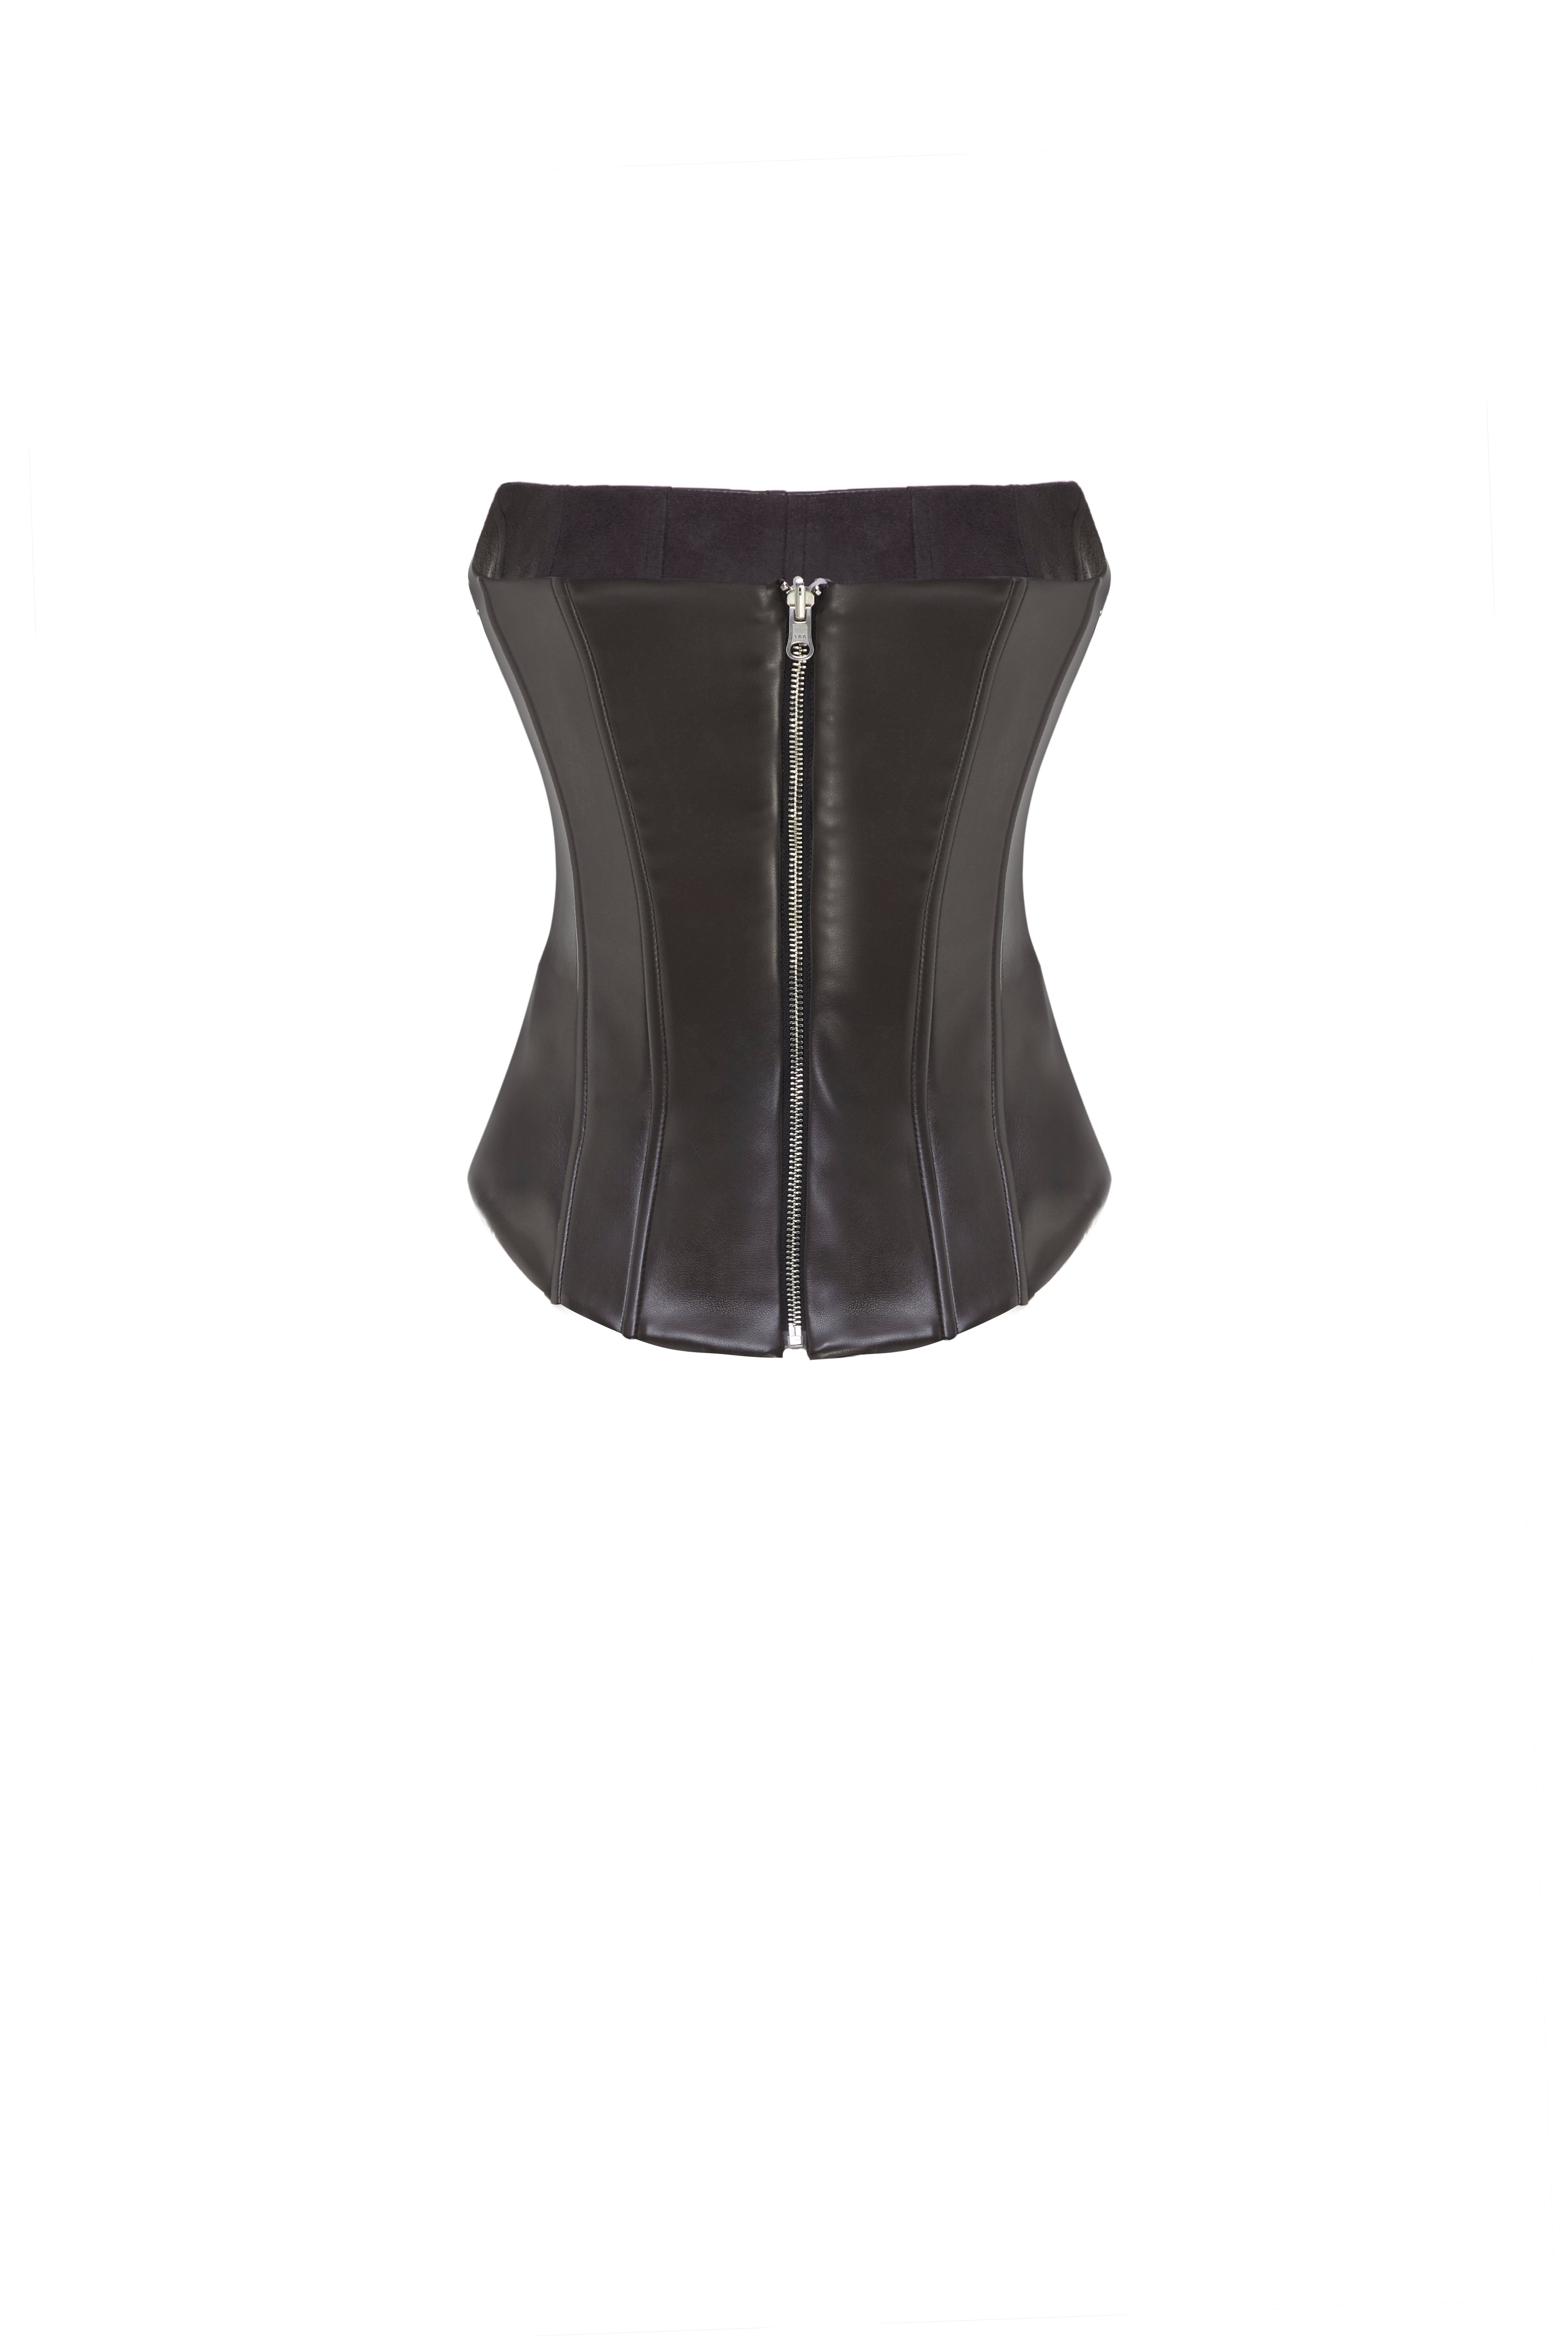 TWO-SIDED TIBI LEATHER CORSET DEEP BROWN